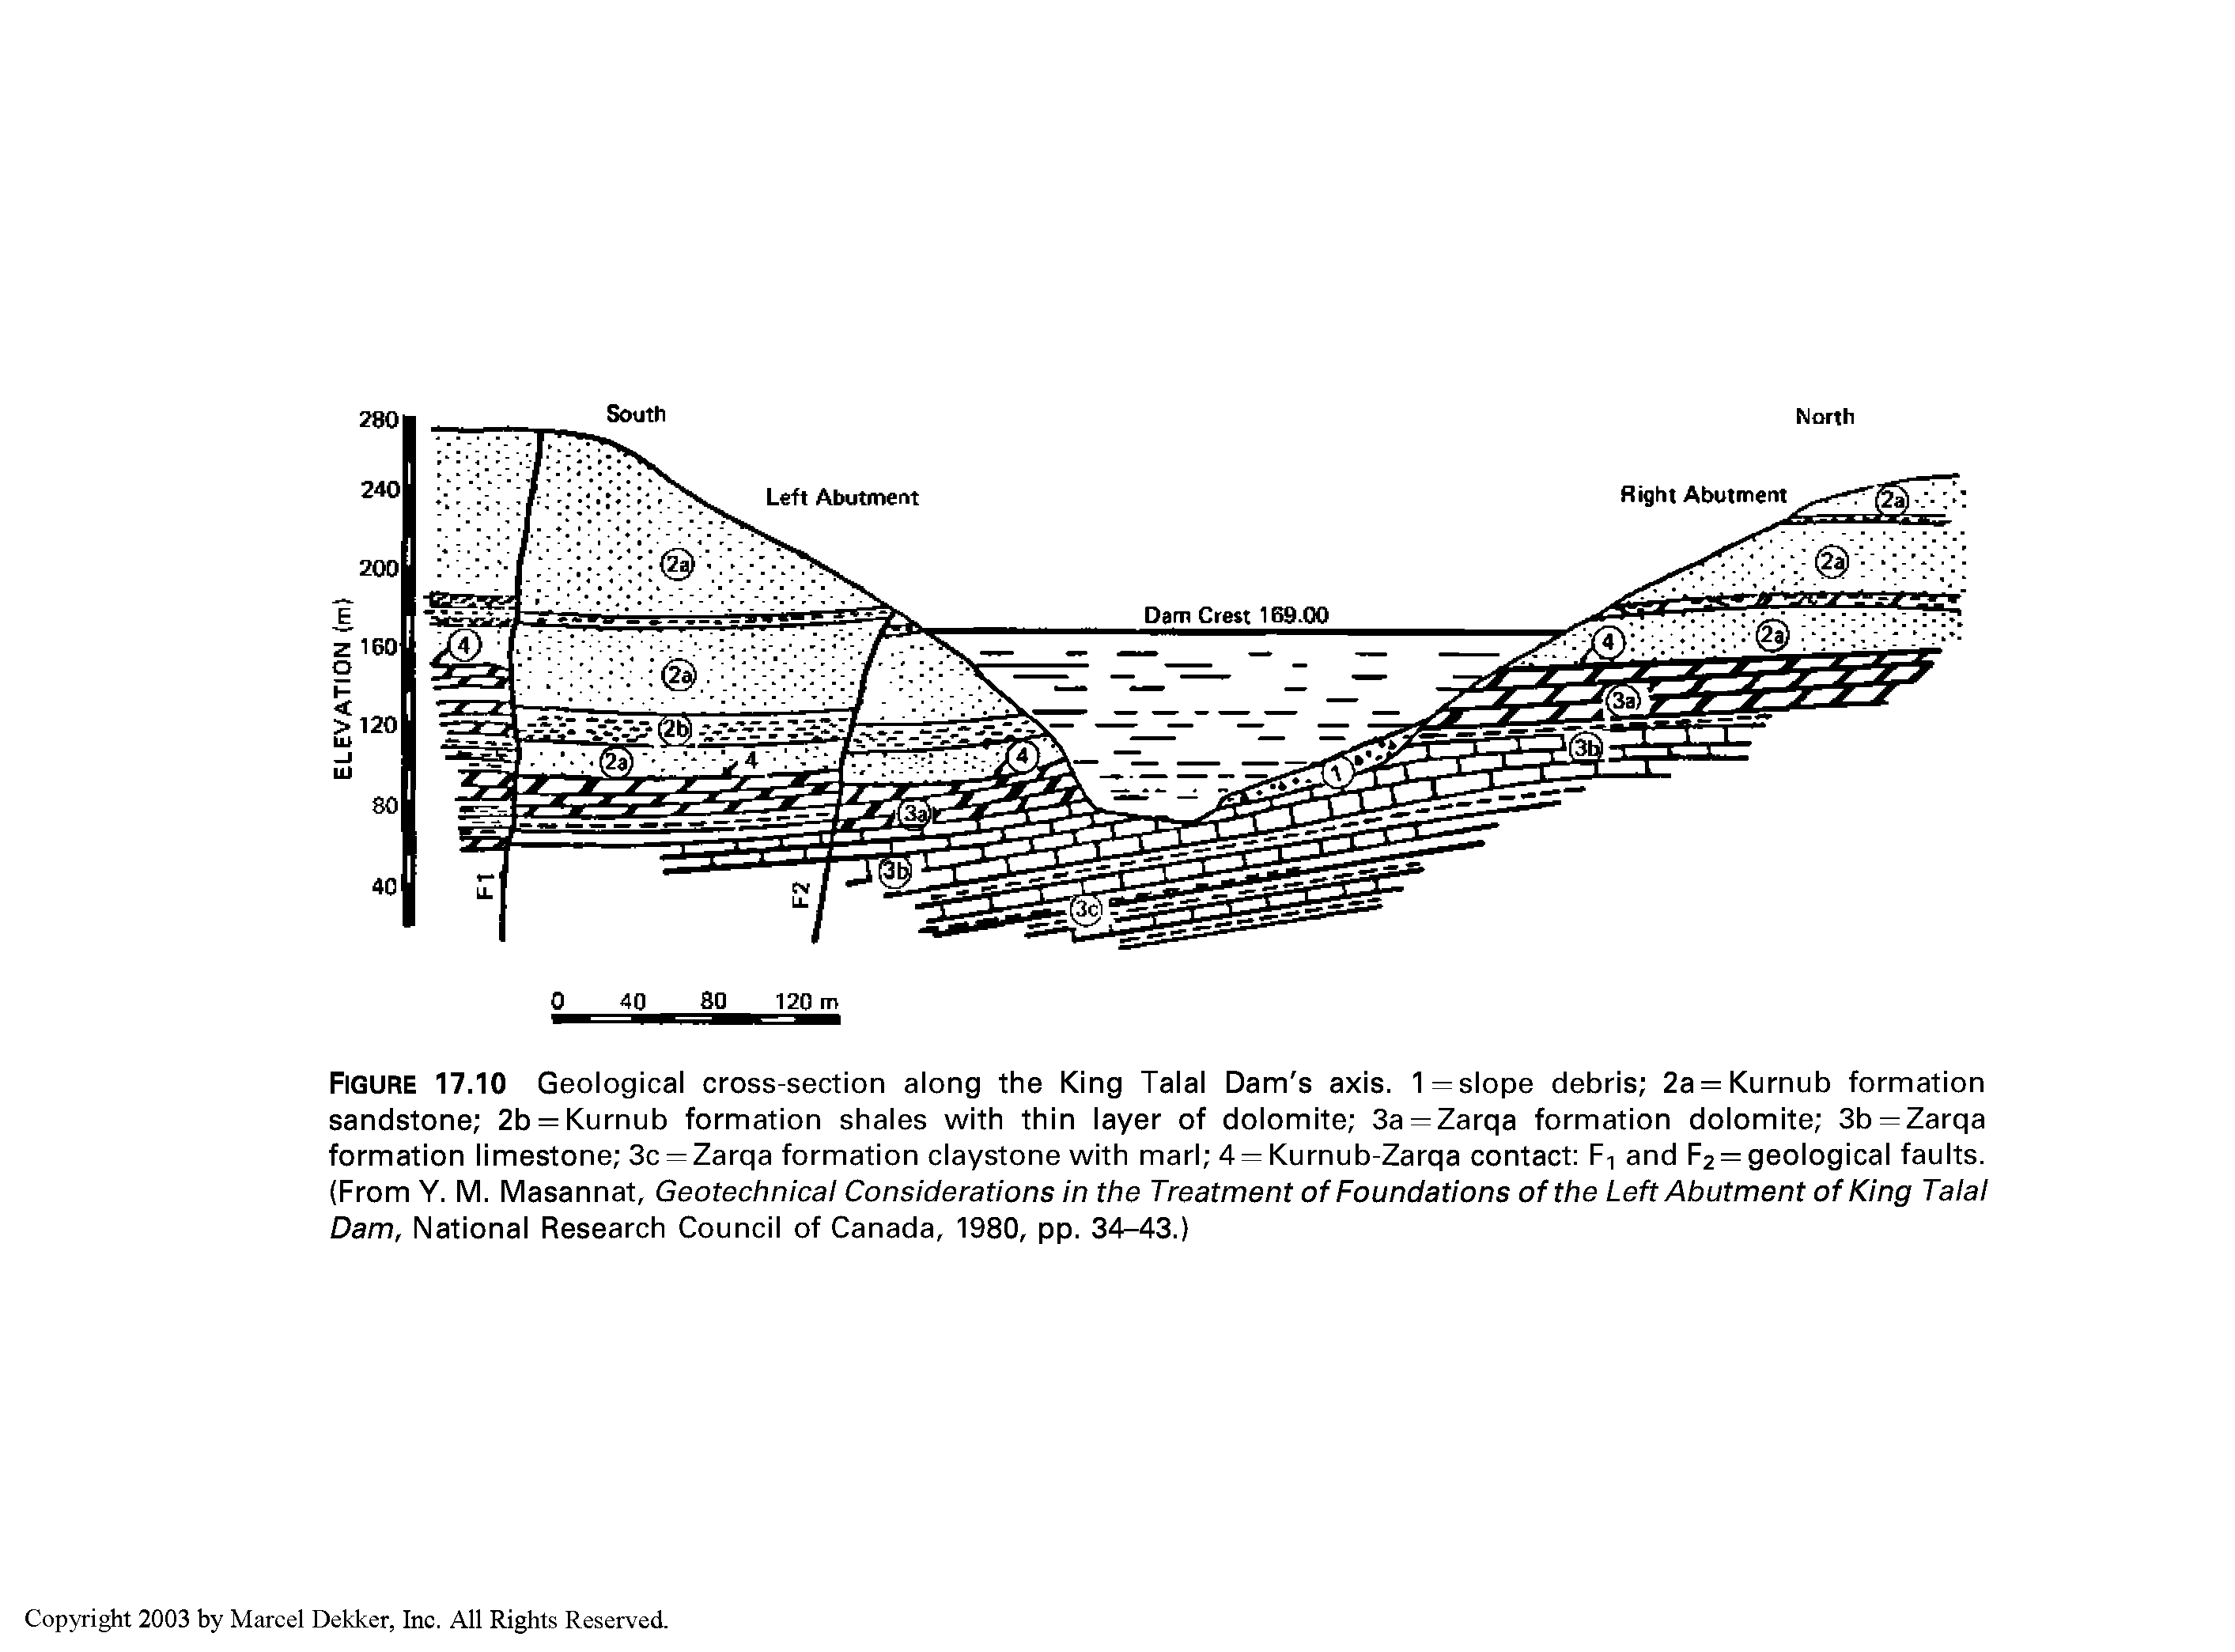 Figure 17.10 Geological cross-section along the King Talal Dam s axis. 1= slope debris 2a = Kurnub formation sandstone 2b = Kurnub formation shales with thin layer of dolomite 3a = Zarqa formation dolomite 3b = Zarqa formation limestone 3c = Zarqa formation claystone with marl 4 = Kurnub-Zarqa contact Ft and p2 = geological faults. (From Y. M. Masannat, Geotechnical Considerations in the Treatment of Foundations of the Left Abutment of King Talal Dam, National Research Council of Canada, 1980, pp. 34-43.)...